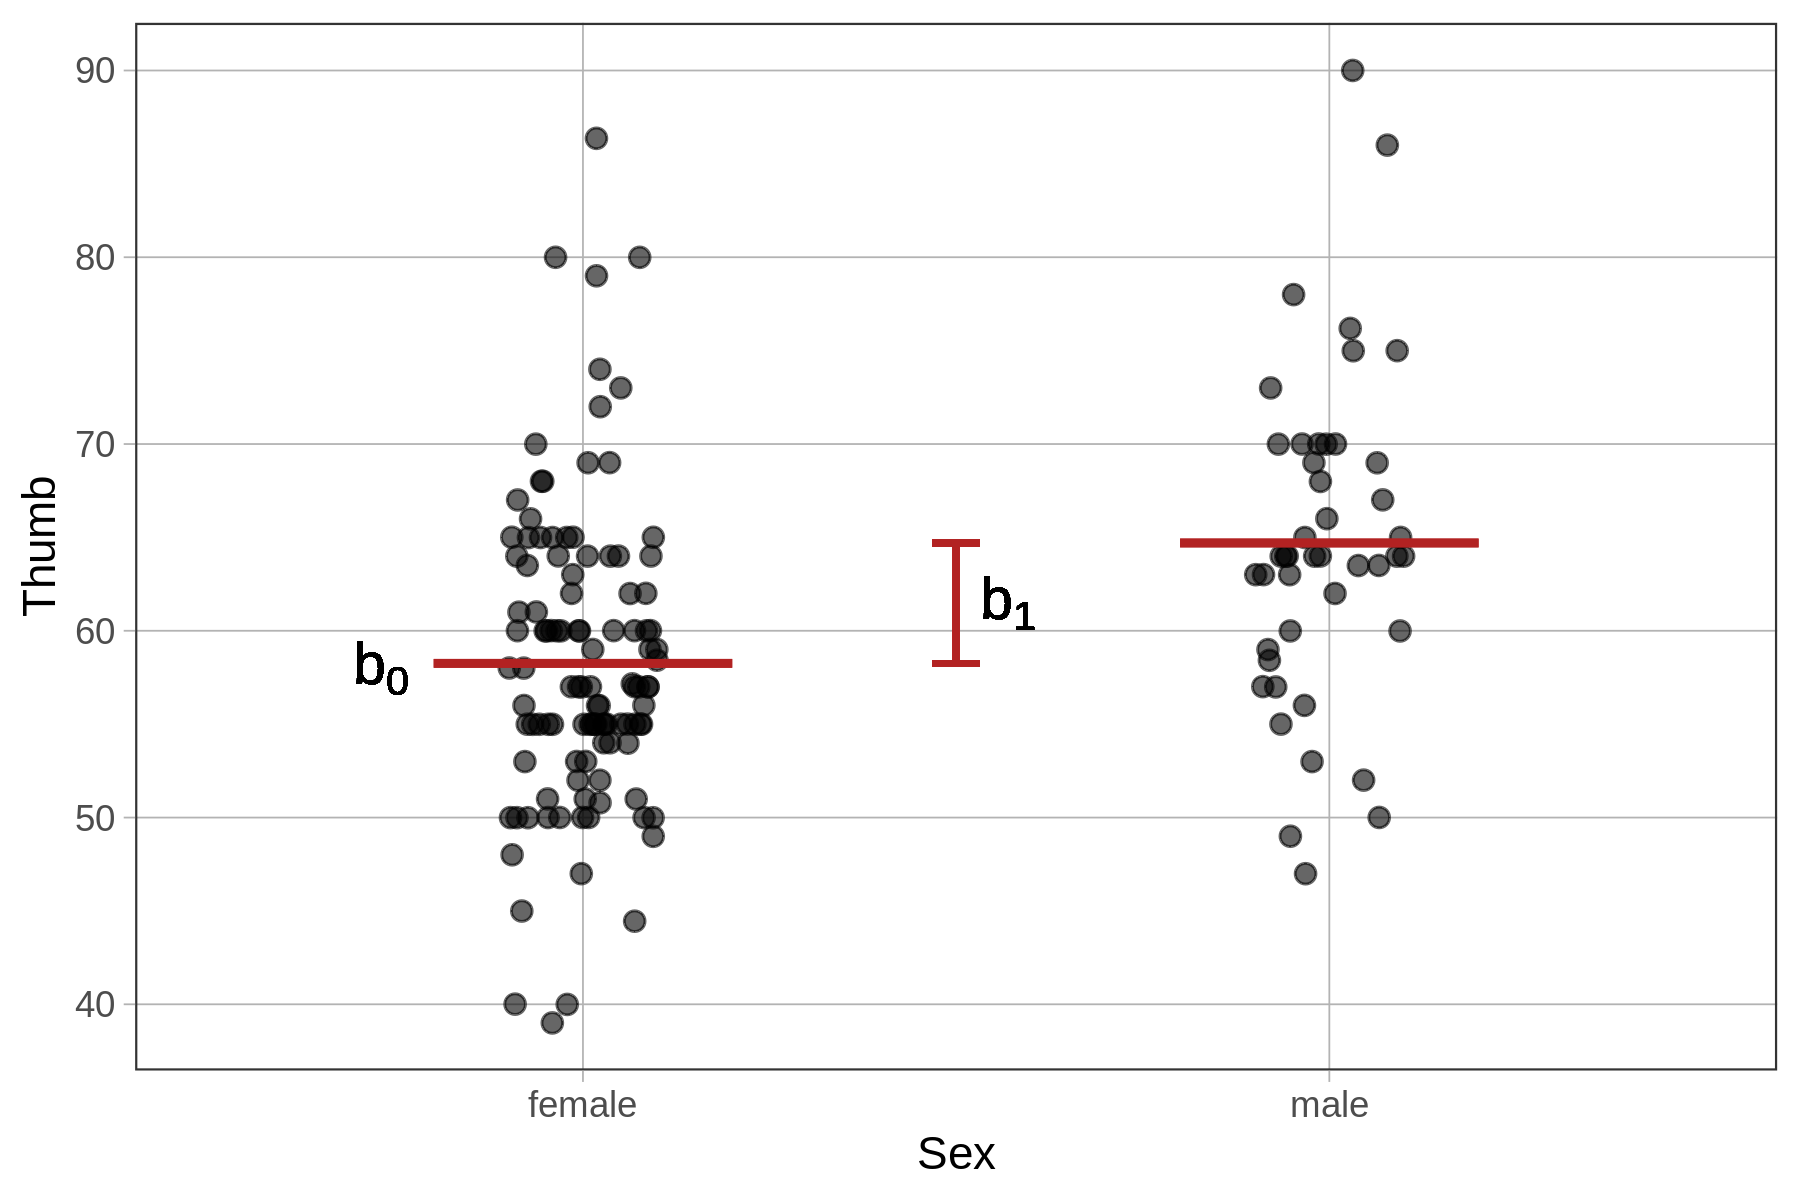 A jitter plot of the distribution of Thumb by Sex, overlaid with a red horizontal line in each group showing the group mean. The line for the female group is labeled as b-sub-zero, the line for the male group is not labeled, and there is a vertical line in between them to indicate the distance between the two group means and it is labeled as b-sub-1.